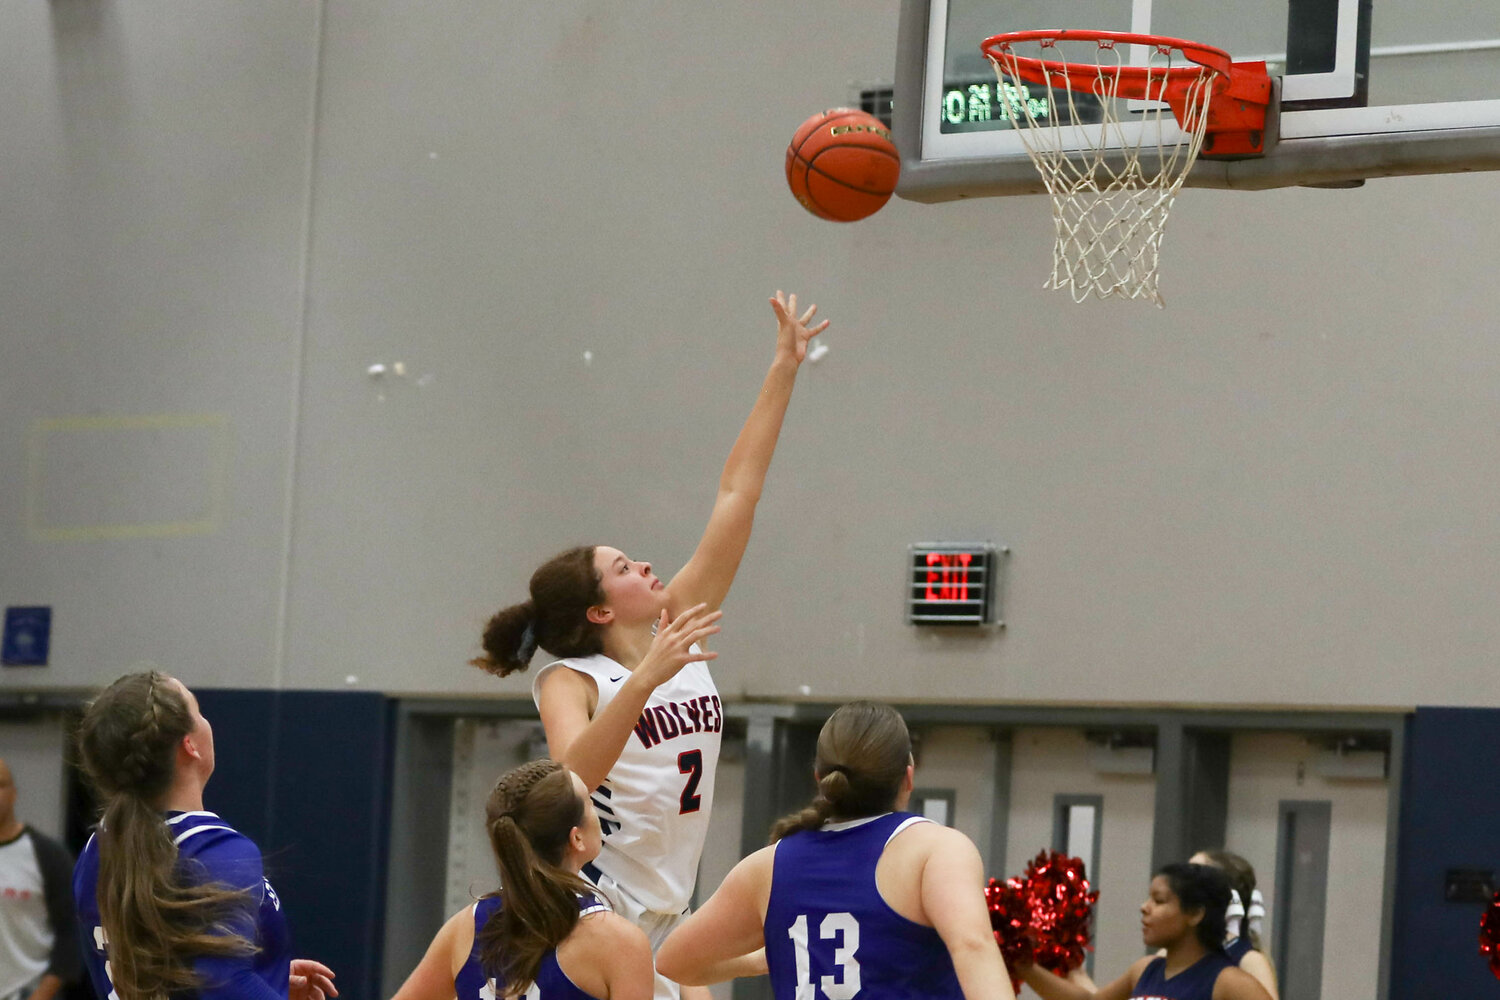 Carmen Williams sinks a layup in the fourth quarter of Black Hills' win over Eatonville on Dec. 4.